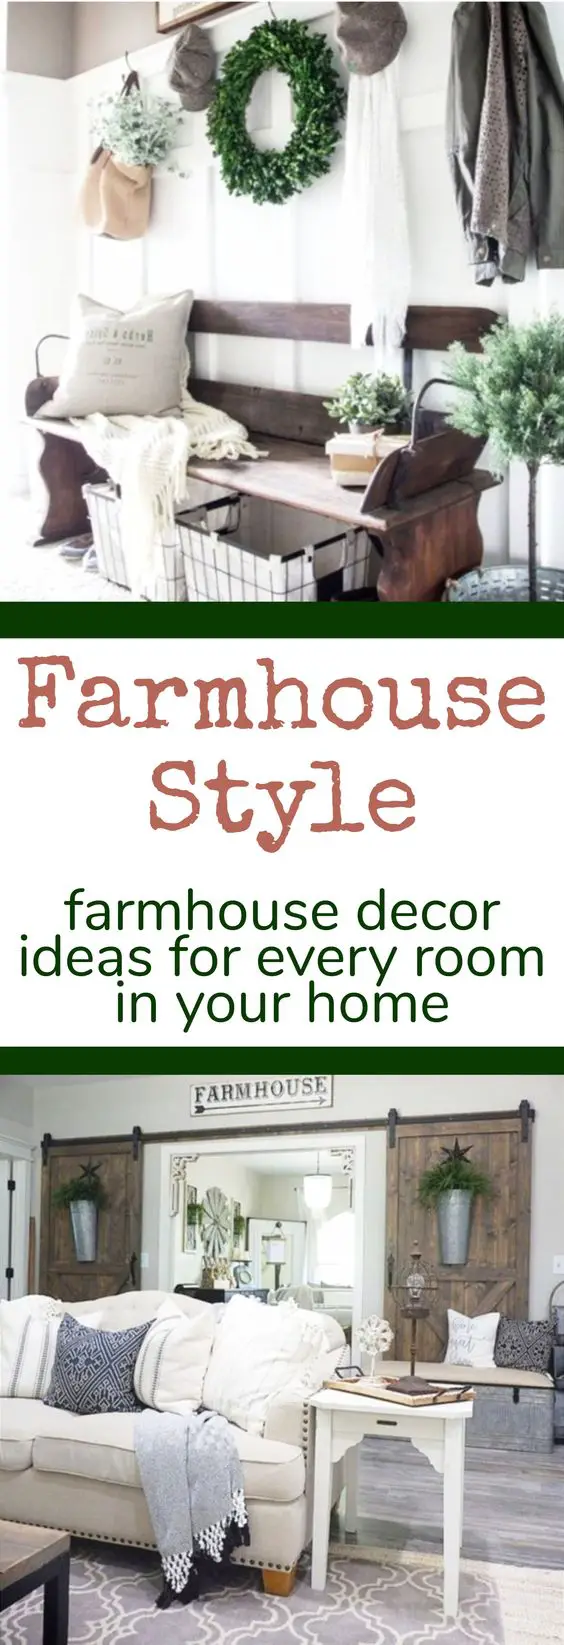 Farmhouse style decorating ideas and DIY Farmhouse room decor for every room in your home.  #farmhousedecorating #rusticfarmhouse #diydecor #homedecorideas #diyhomedecor #farmhousestyle #farmhousedecorideas #decoratingideas #kitchenideas #livingroomideas #bedroomideas #bathroomideas #laundryroomideas